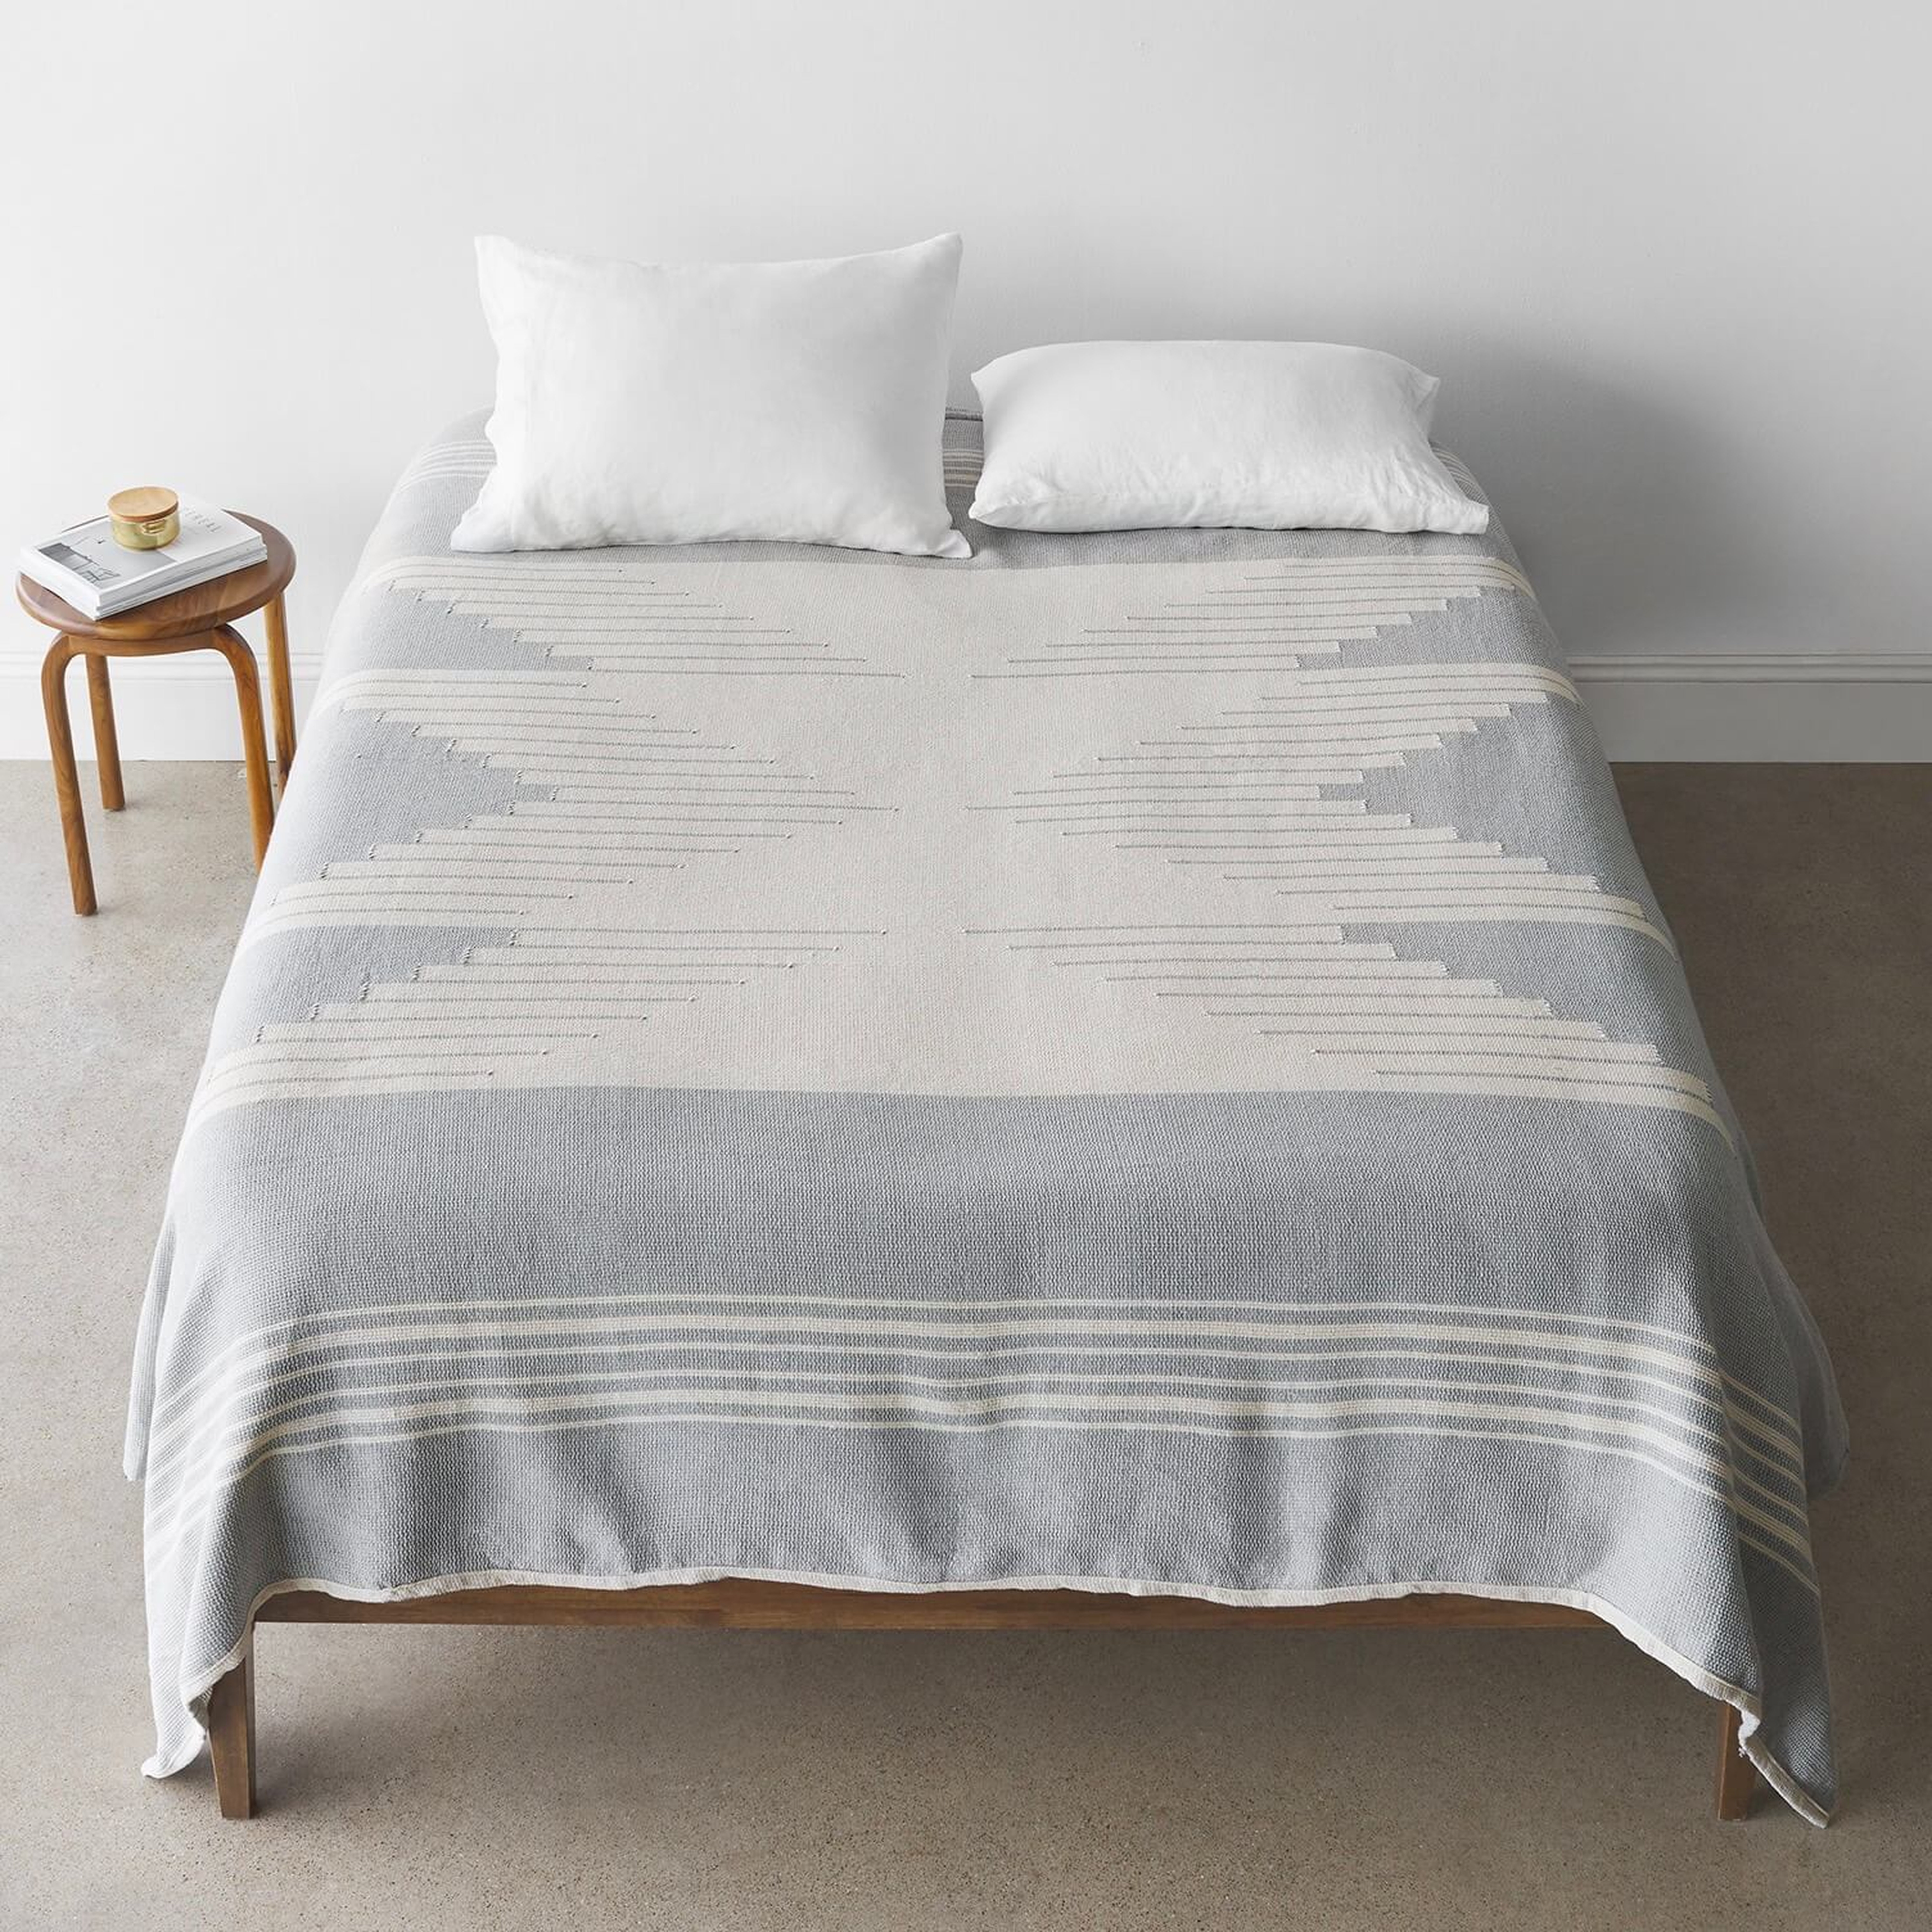 Bico Bed Blanket - Pewter - Queen By The Citizenry - The Citizenry